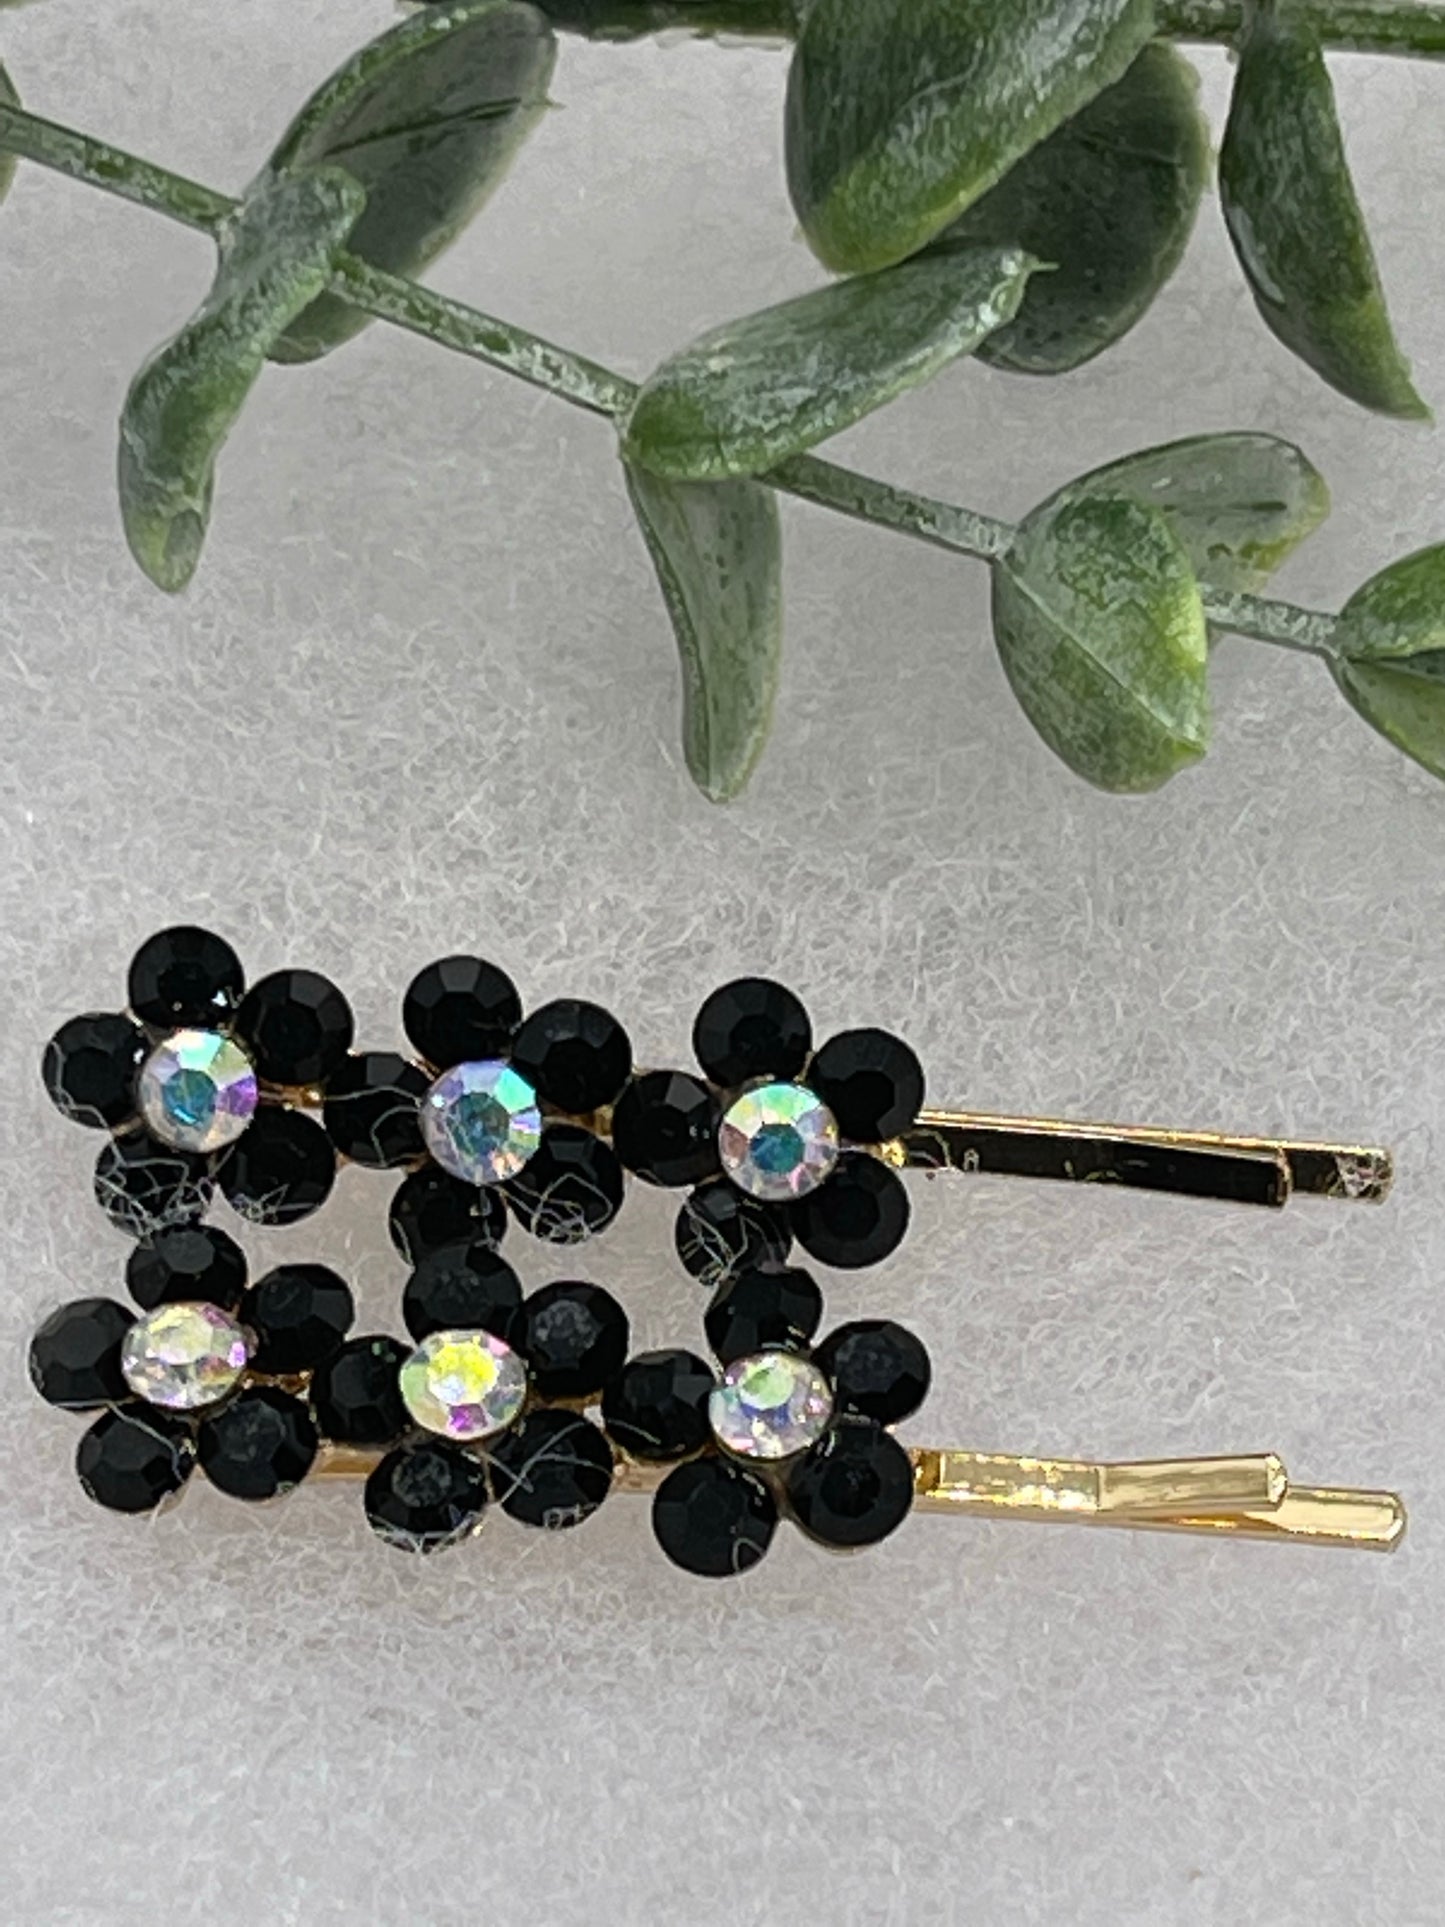 Black crystal rhinestone flowers approximately 2.0” gold tone hair pins 2 pc set wedding bridal shower engagement formal princess accessory accessories